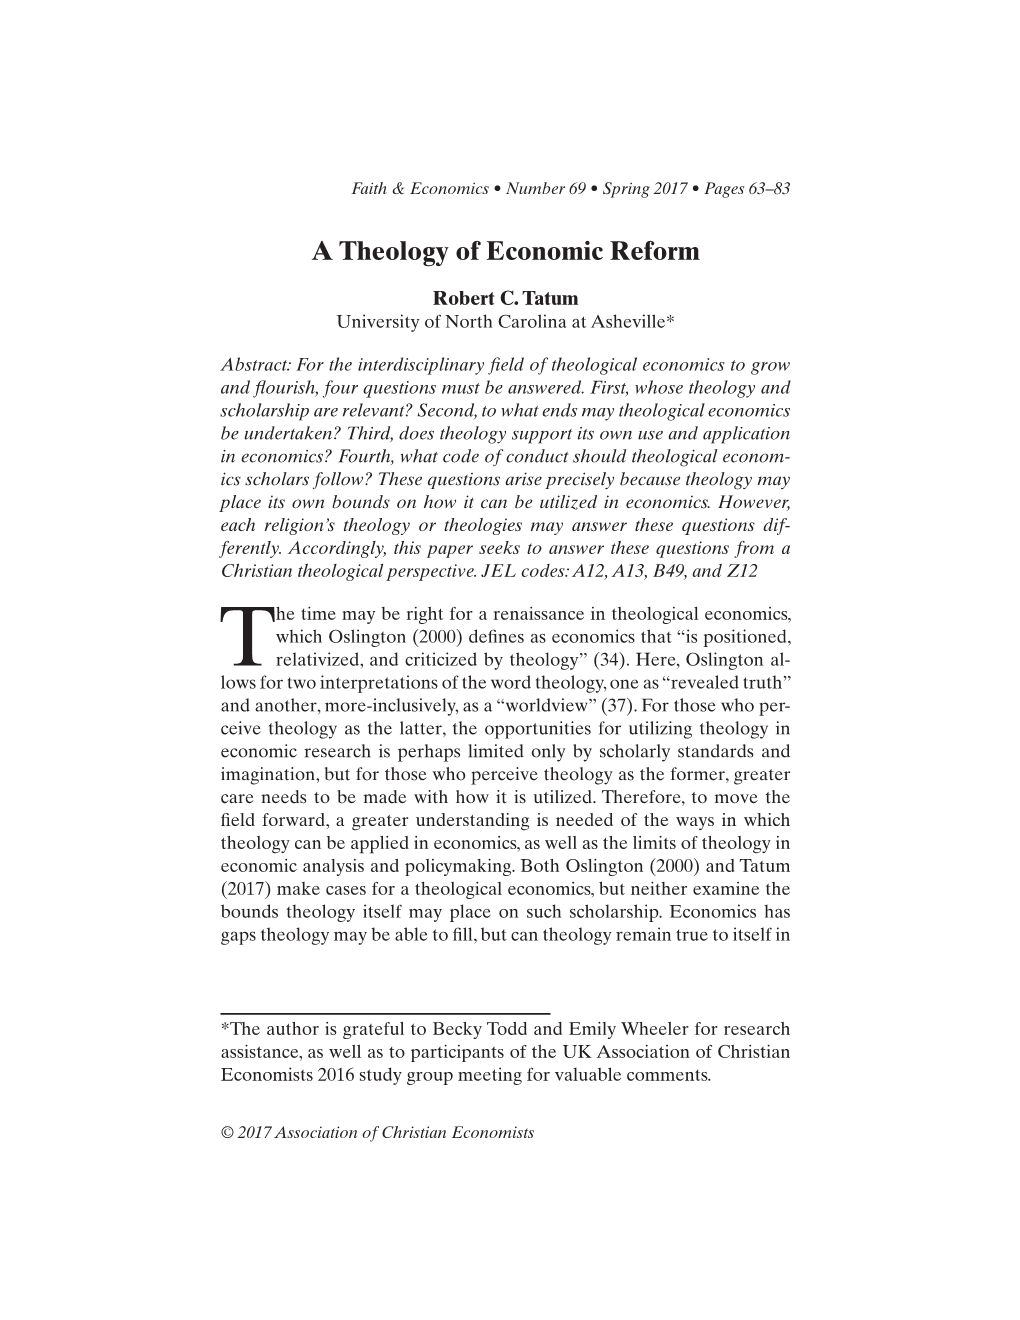 A Theology of Economic Reform